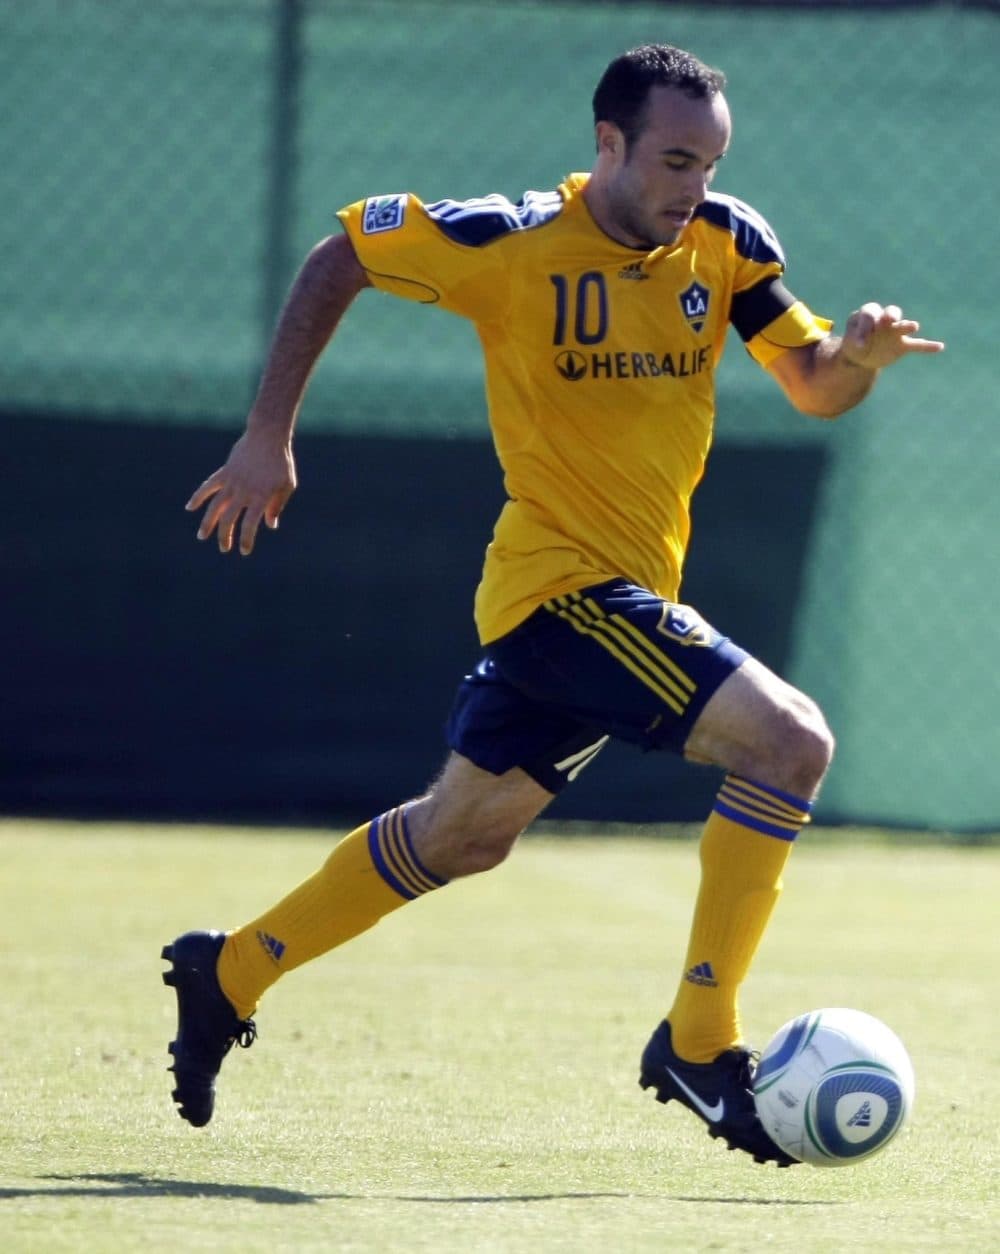 Landon Donovan at an LA Galaxy practice earlier this month. Thanks to a new labor agreement announced Saturday, Major League Soccer avoided a players&#039; strike that could have delayed or cancelled the 2010 season. (AP Photo)